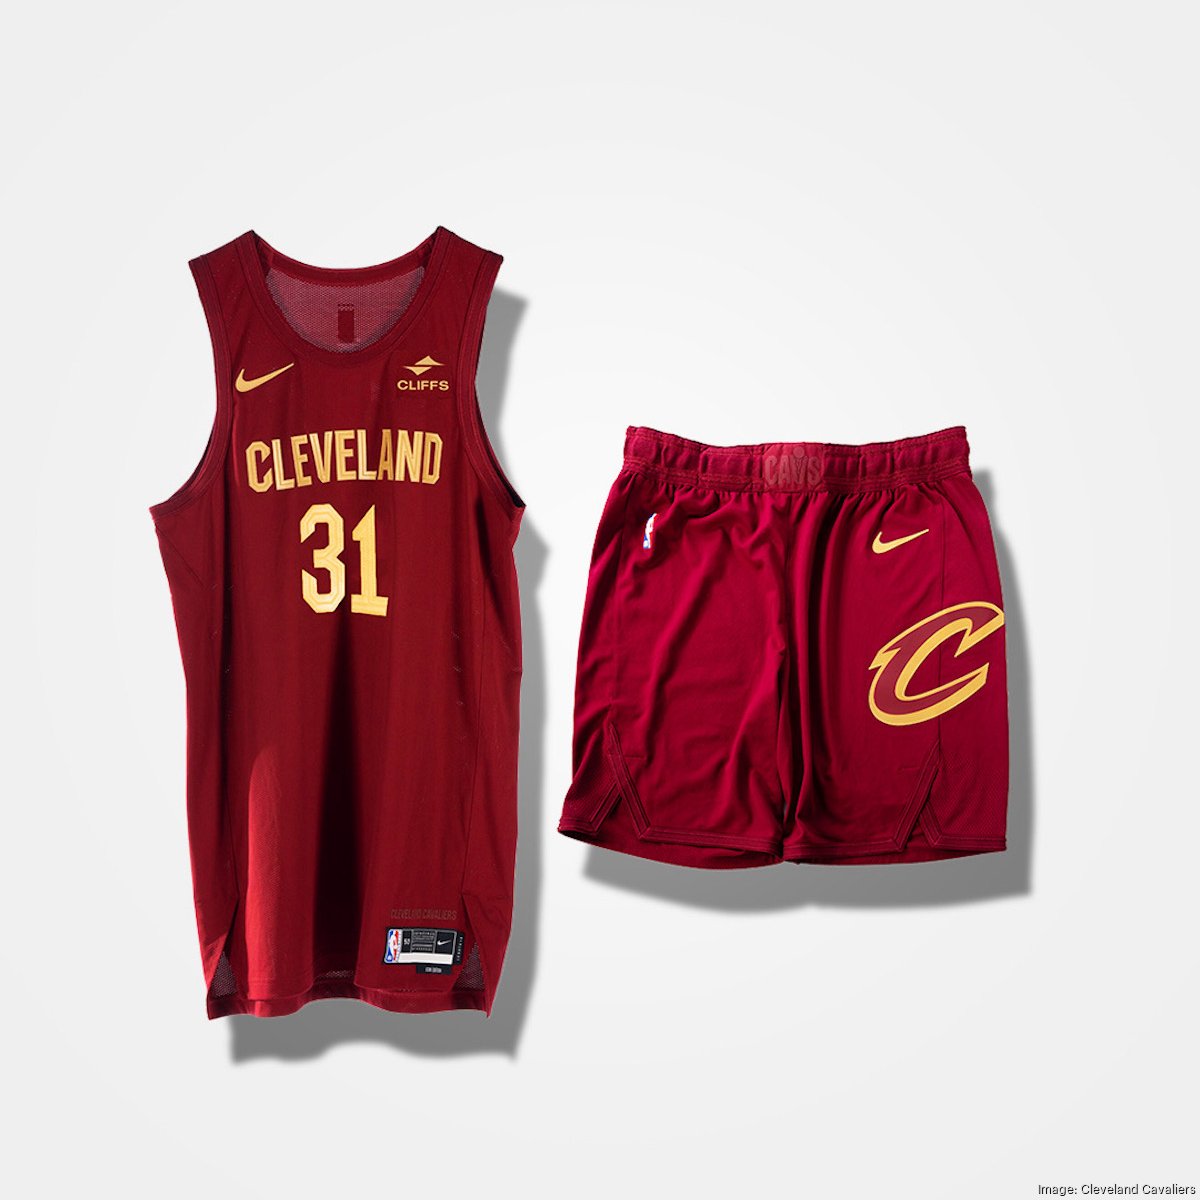 Order your Cleveland Cavaliers Nike City Edition gear today